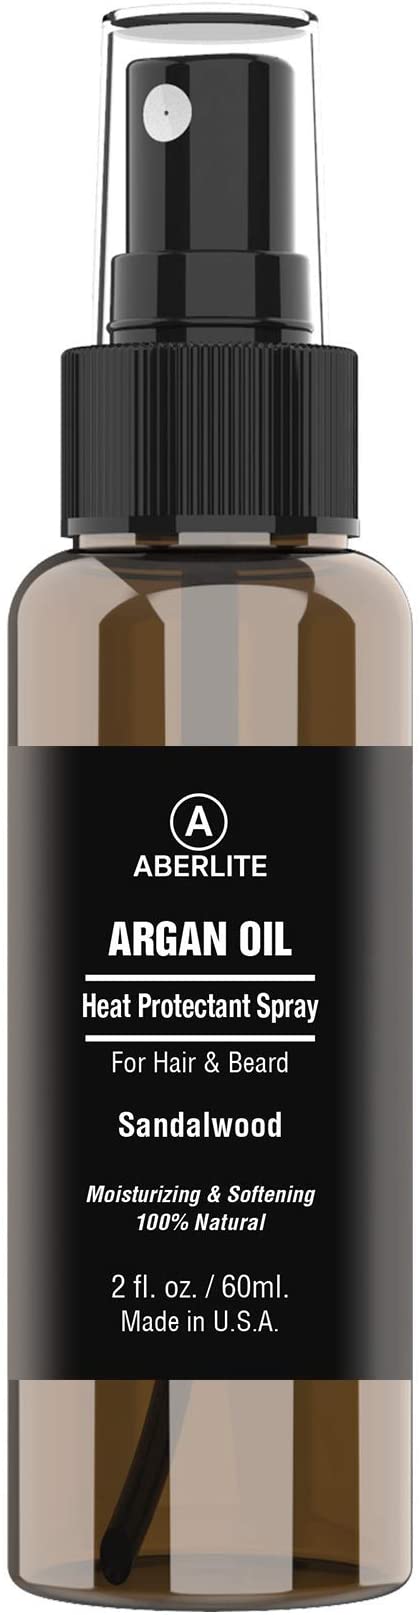 Aberlite Hair & Beard Heat Shield Protectant Spray - Argan Oil Thermal Protector Protect up to 450º F (Sandalwood Scent) - 2oz